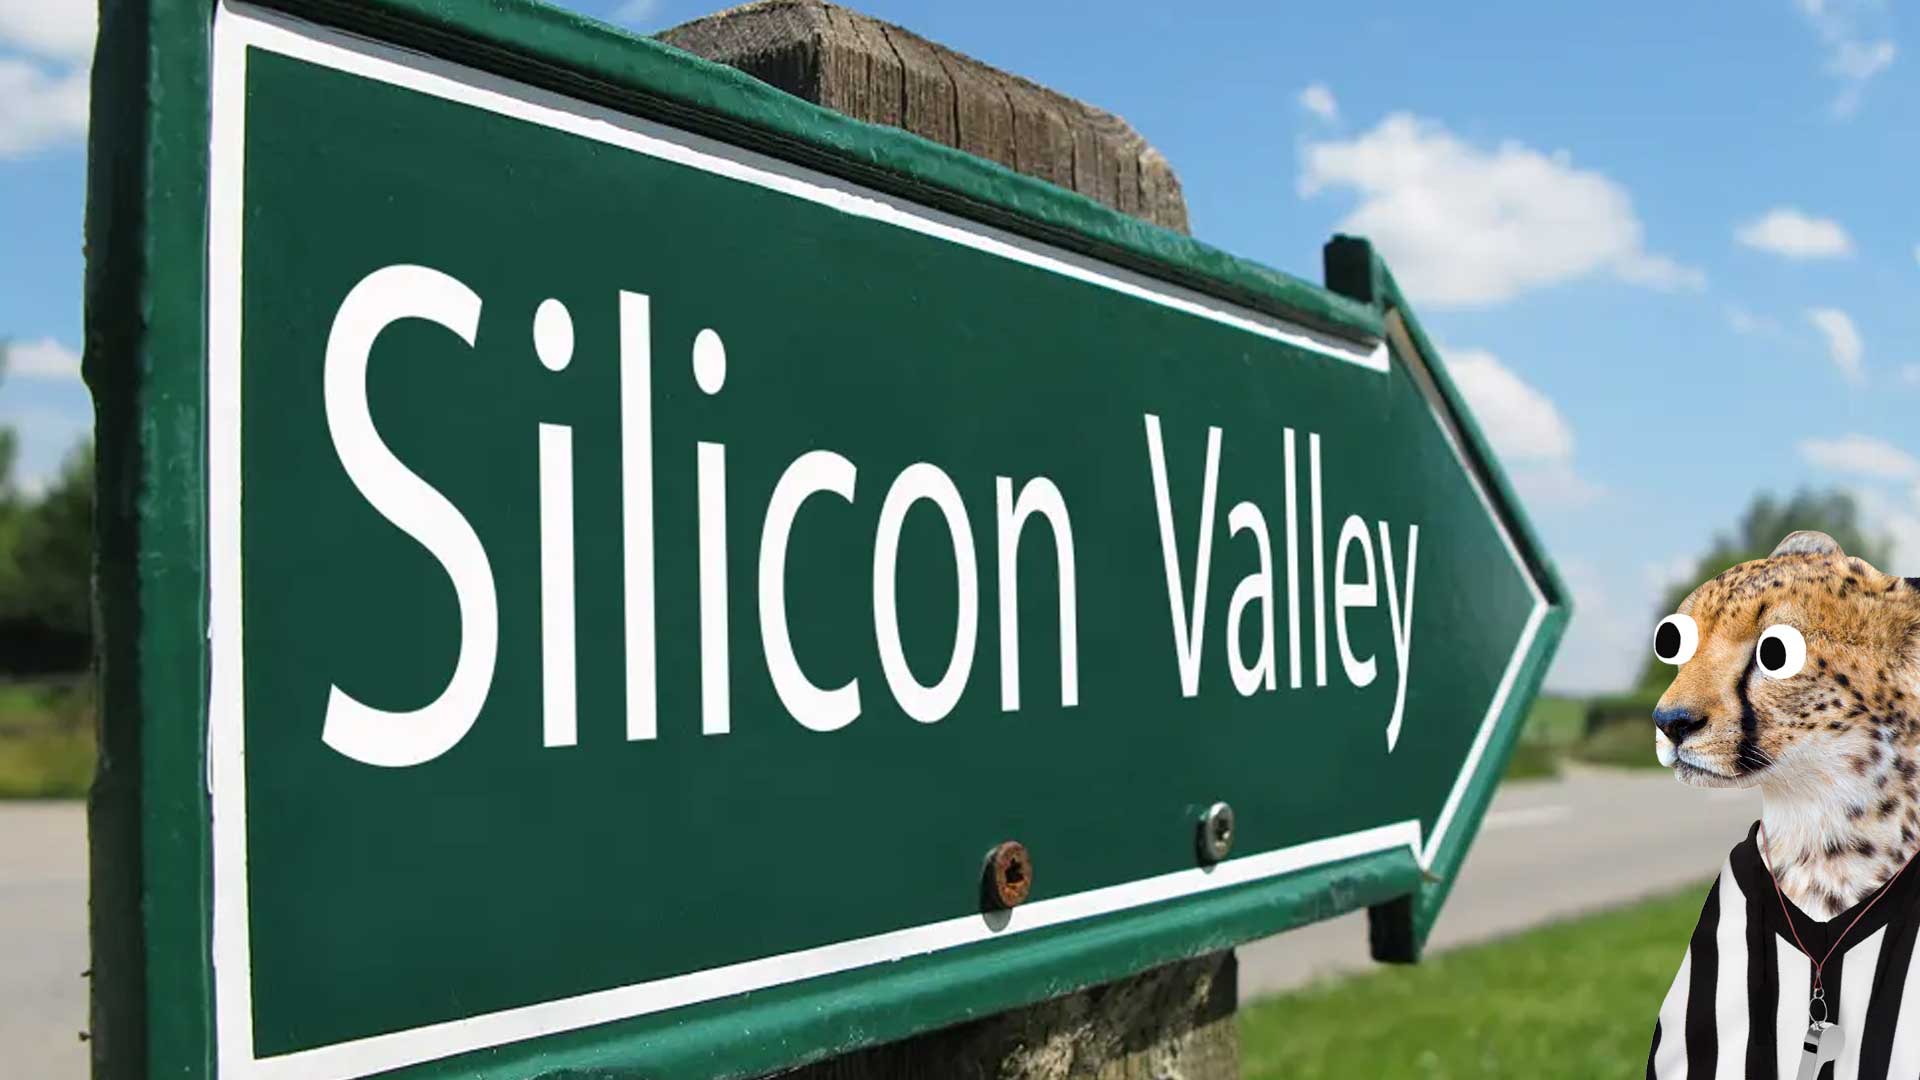 A sign to Silicon Valley